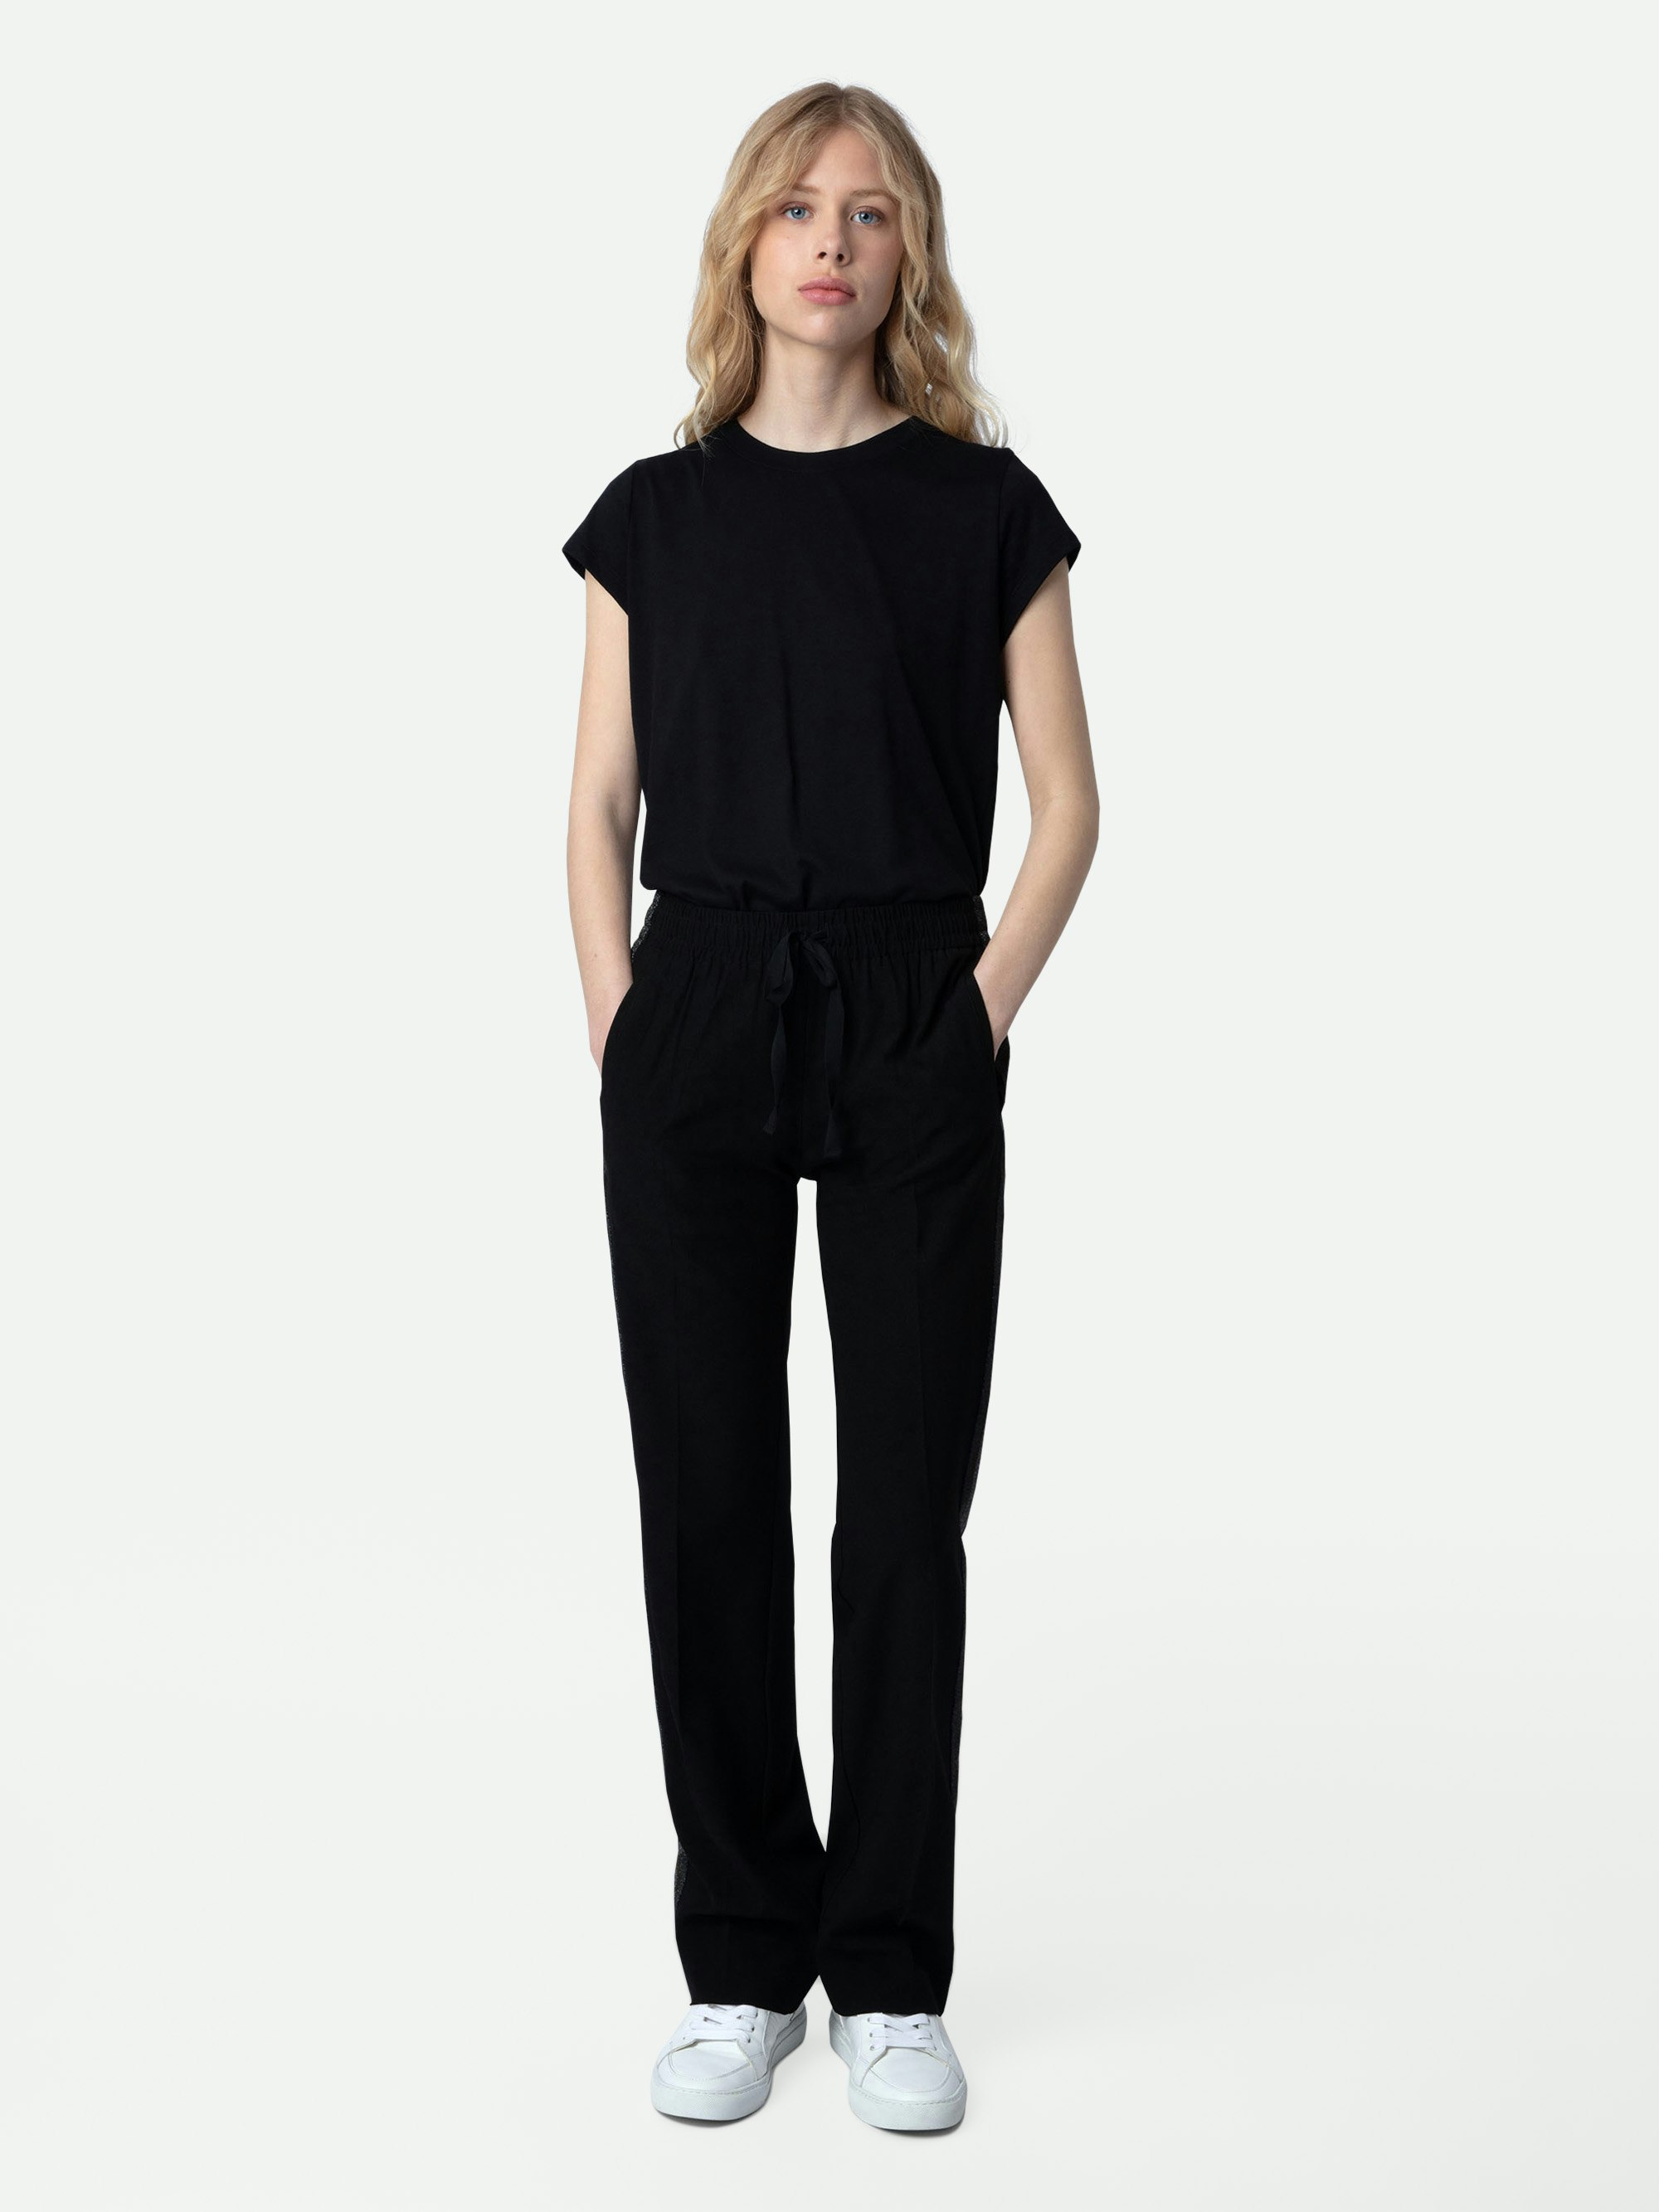 Pomy Pants - Women's black trousers with glittery side bands